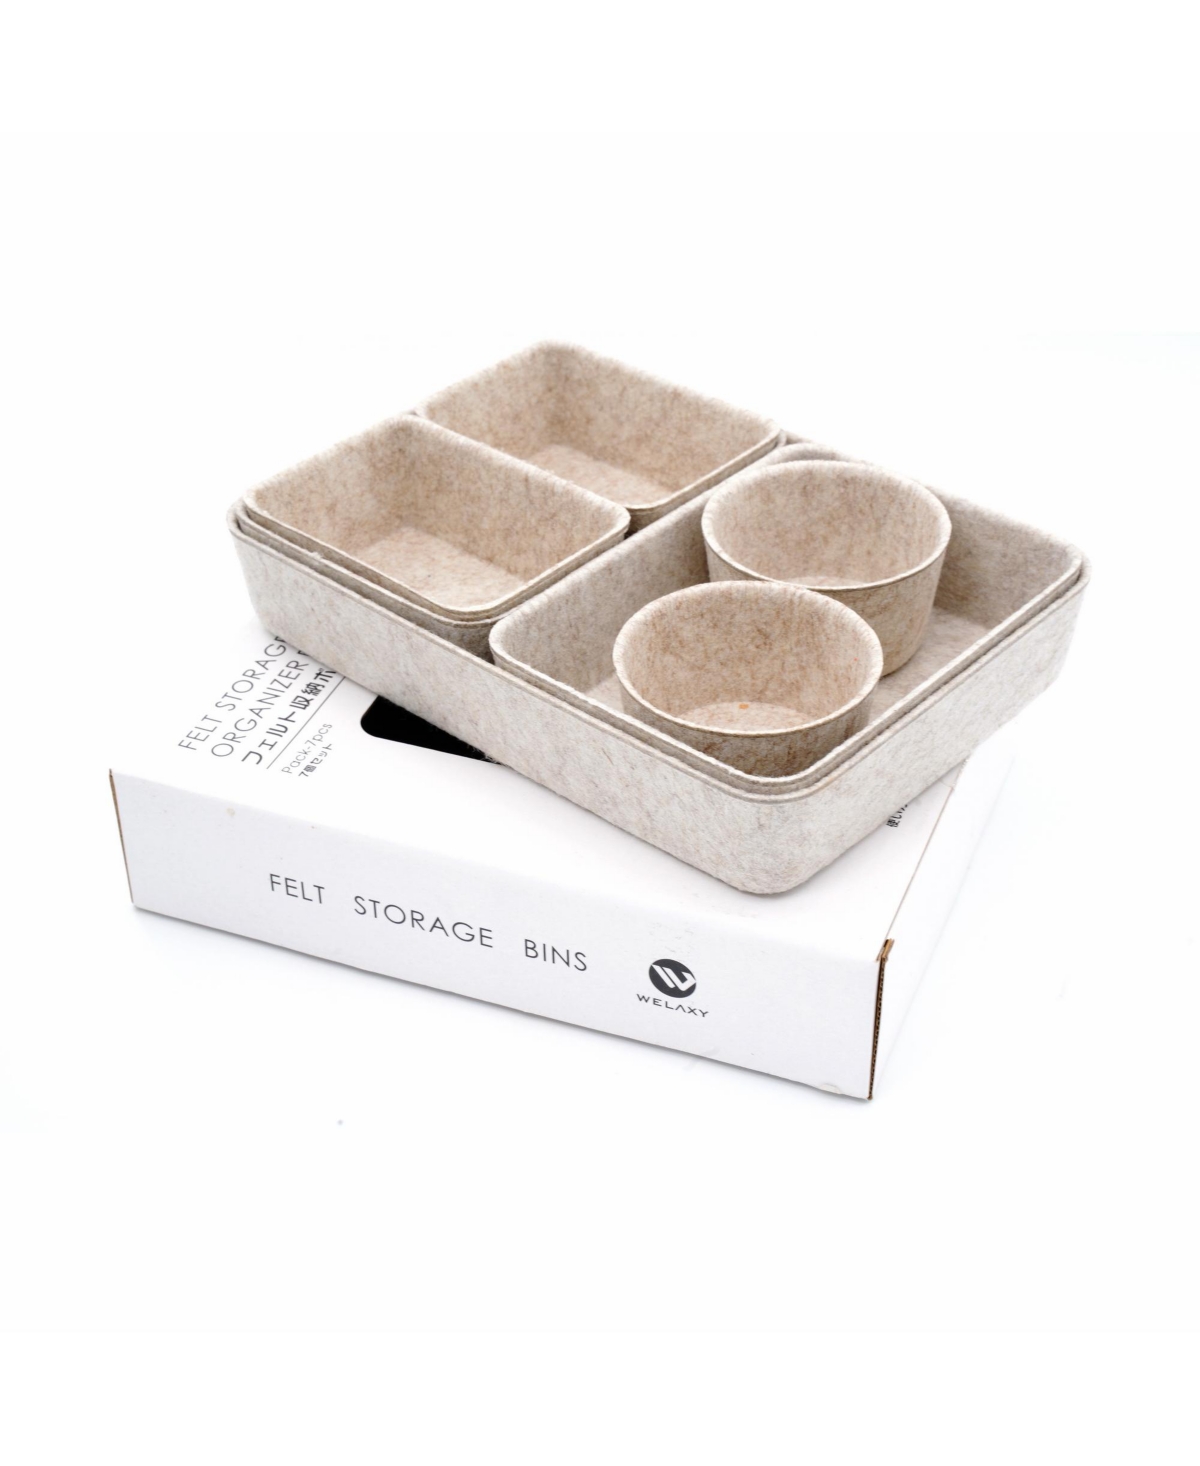 7 Piece Felt Drawer Organizer Set with Round Cups and Trays - Oatmeal